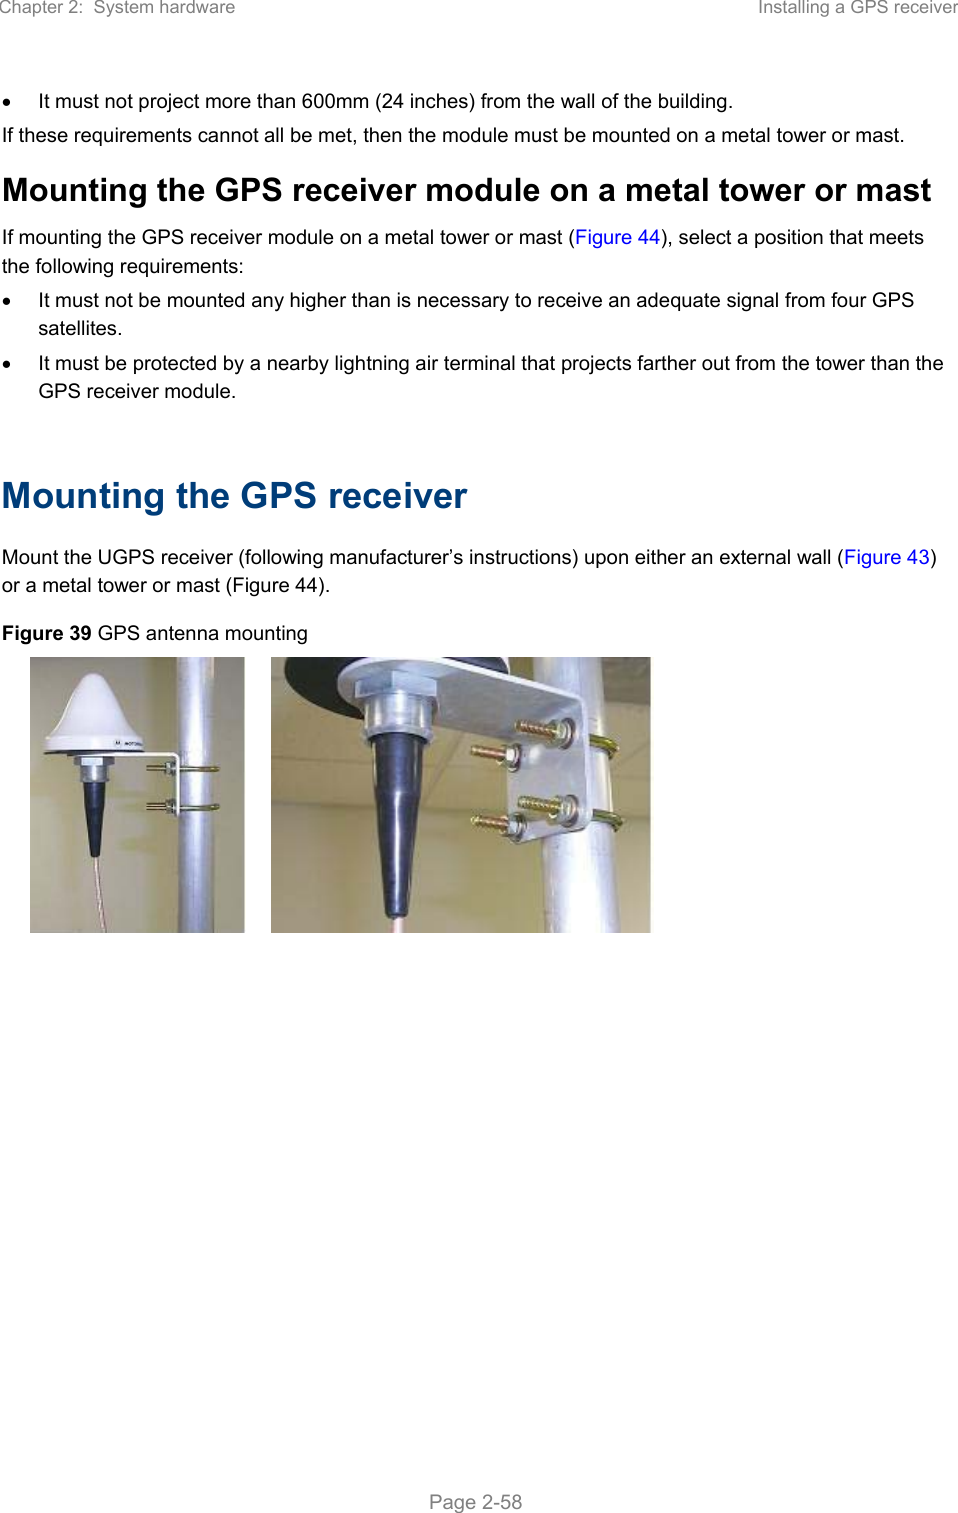 Chapter 2:  System hardware  Installing a GPS receiver   Page 2-58   It must not project more than 600mm (24 inches) from the wall of the building. If these requirements cannot all be met, then the module must be mounted on a metal tower or mast. Mounting the GPS receiver module on a metal tower or mast If mounting the GPS receiver module on a metal tower or mast (Figure 44), select a position that meets the following requirements:   It must not be mounted any higher than is necessary to receive an adequate signal from four GPS satellites.   It must be protected by a nearby lightning air terminal that projects farther out from the tower than the GPS receiver module.  Mounting the GPS receiver Mount the UGPS receiver (following manufacturer’s instructions) upon either an external wall (Figure 43) or a metal tower or mast (Figure 44). Figure 39 GPS antenna mounting     